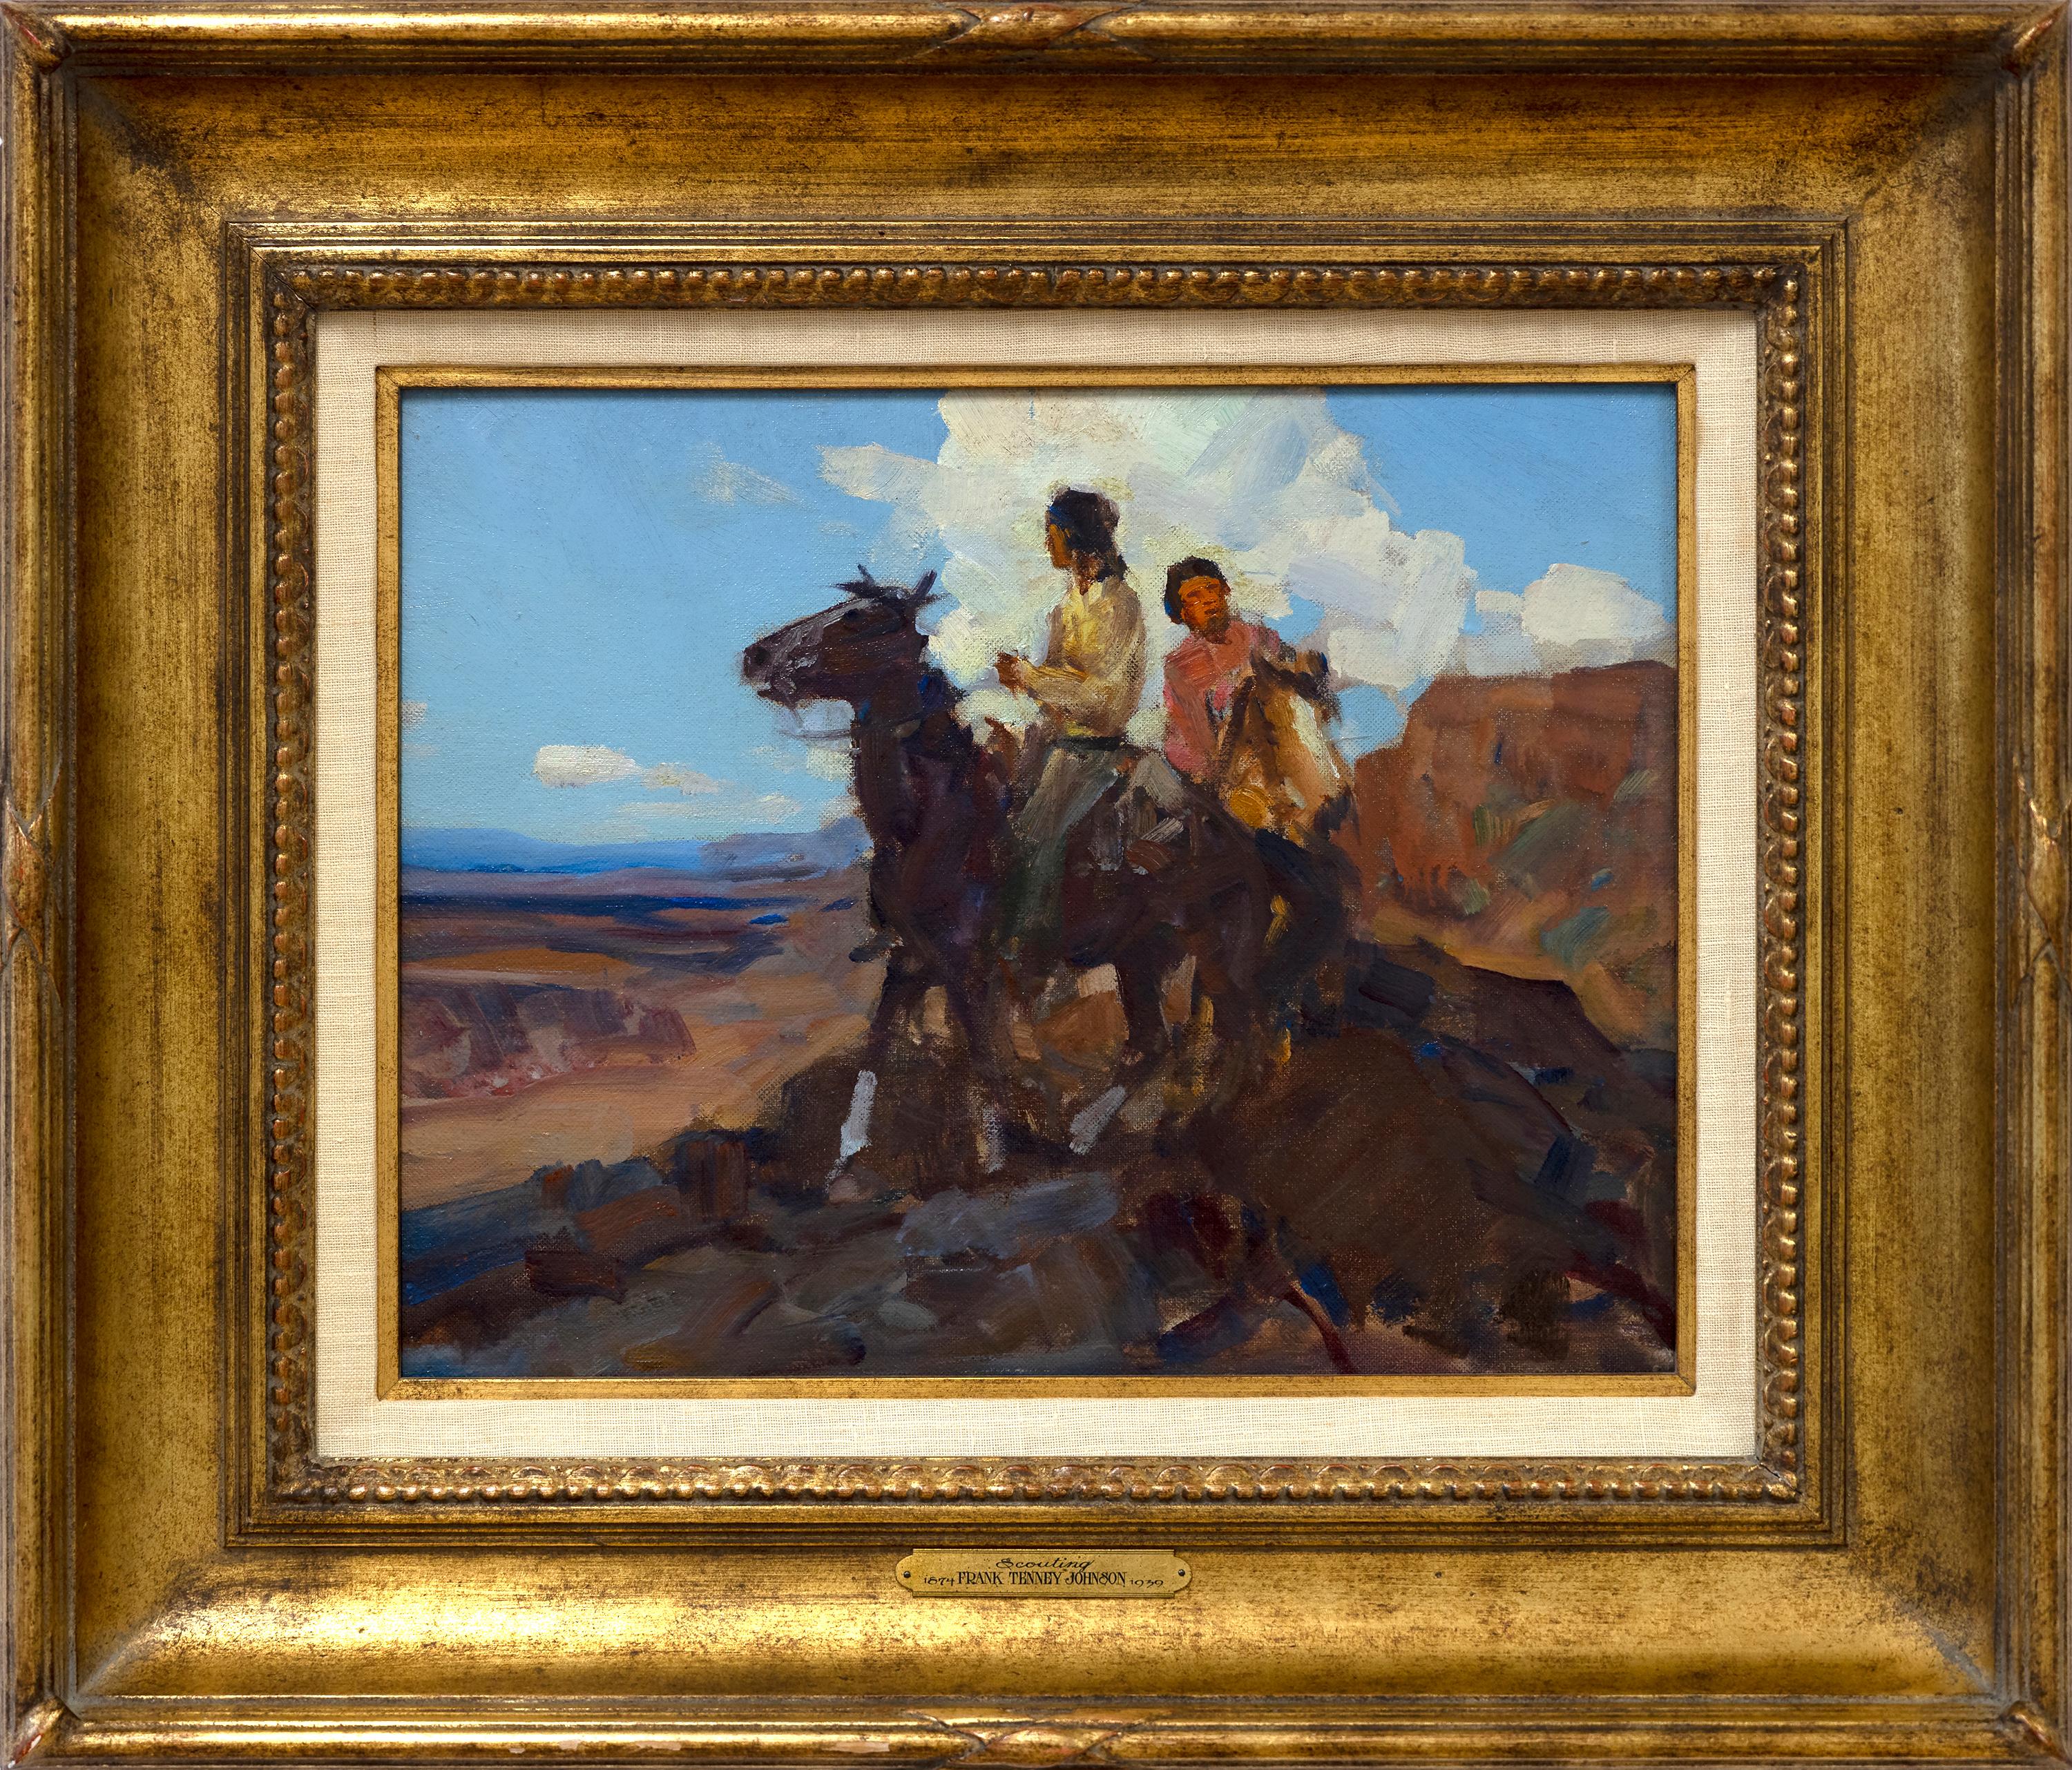 Scouting - Painting by Frank Tenney Johnson